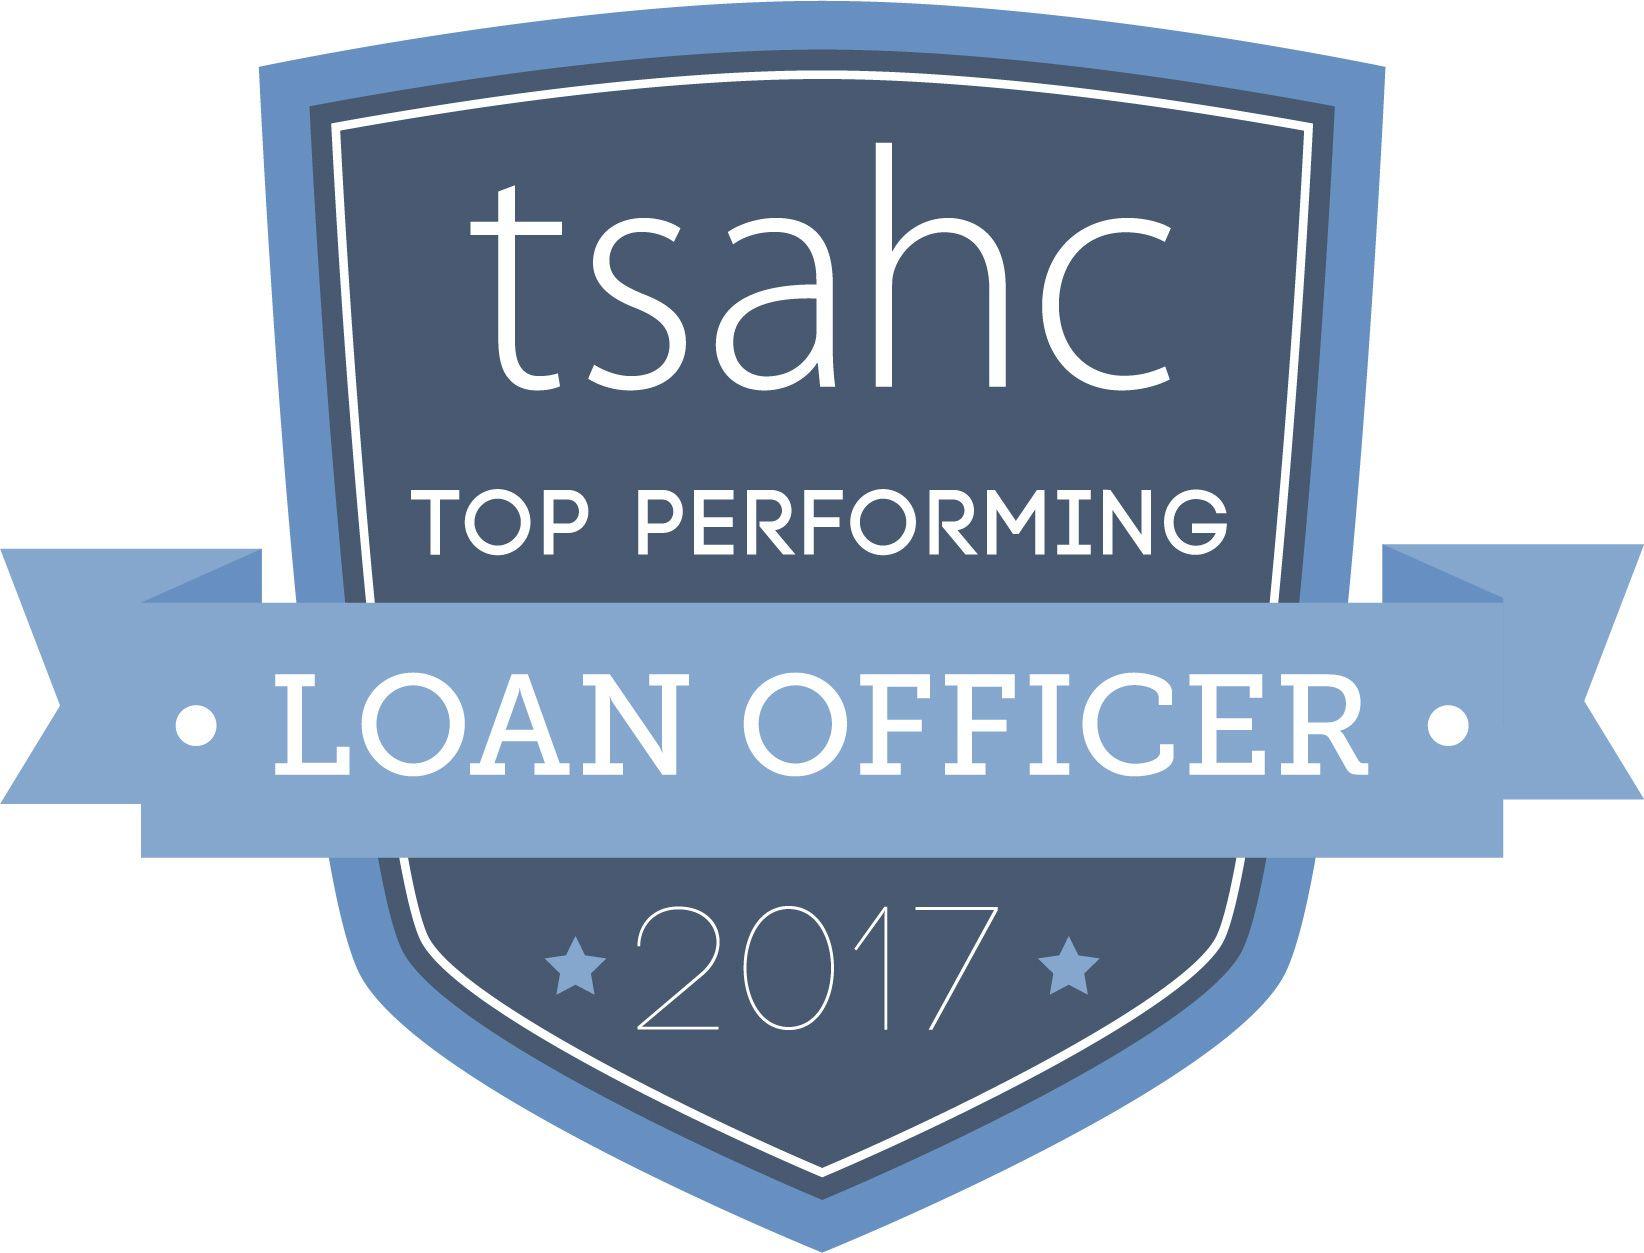 Loan Officer Logo - Top Loan Officer Marketing Materials | Texas State Affordable ...